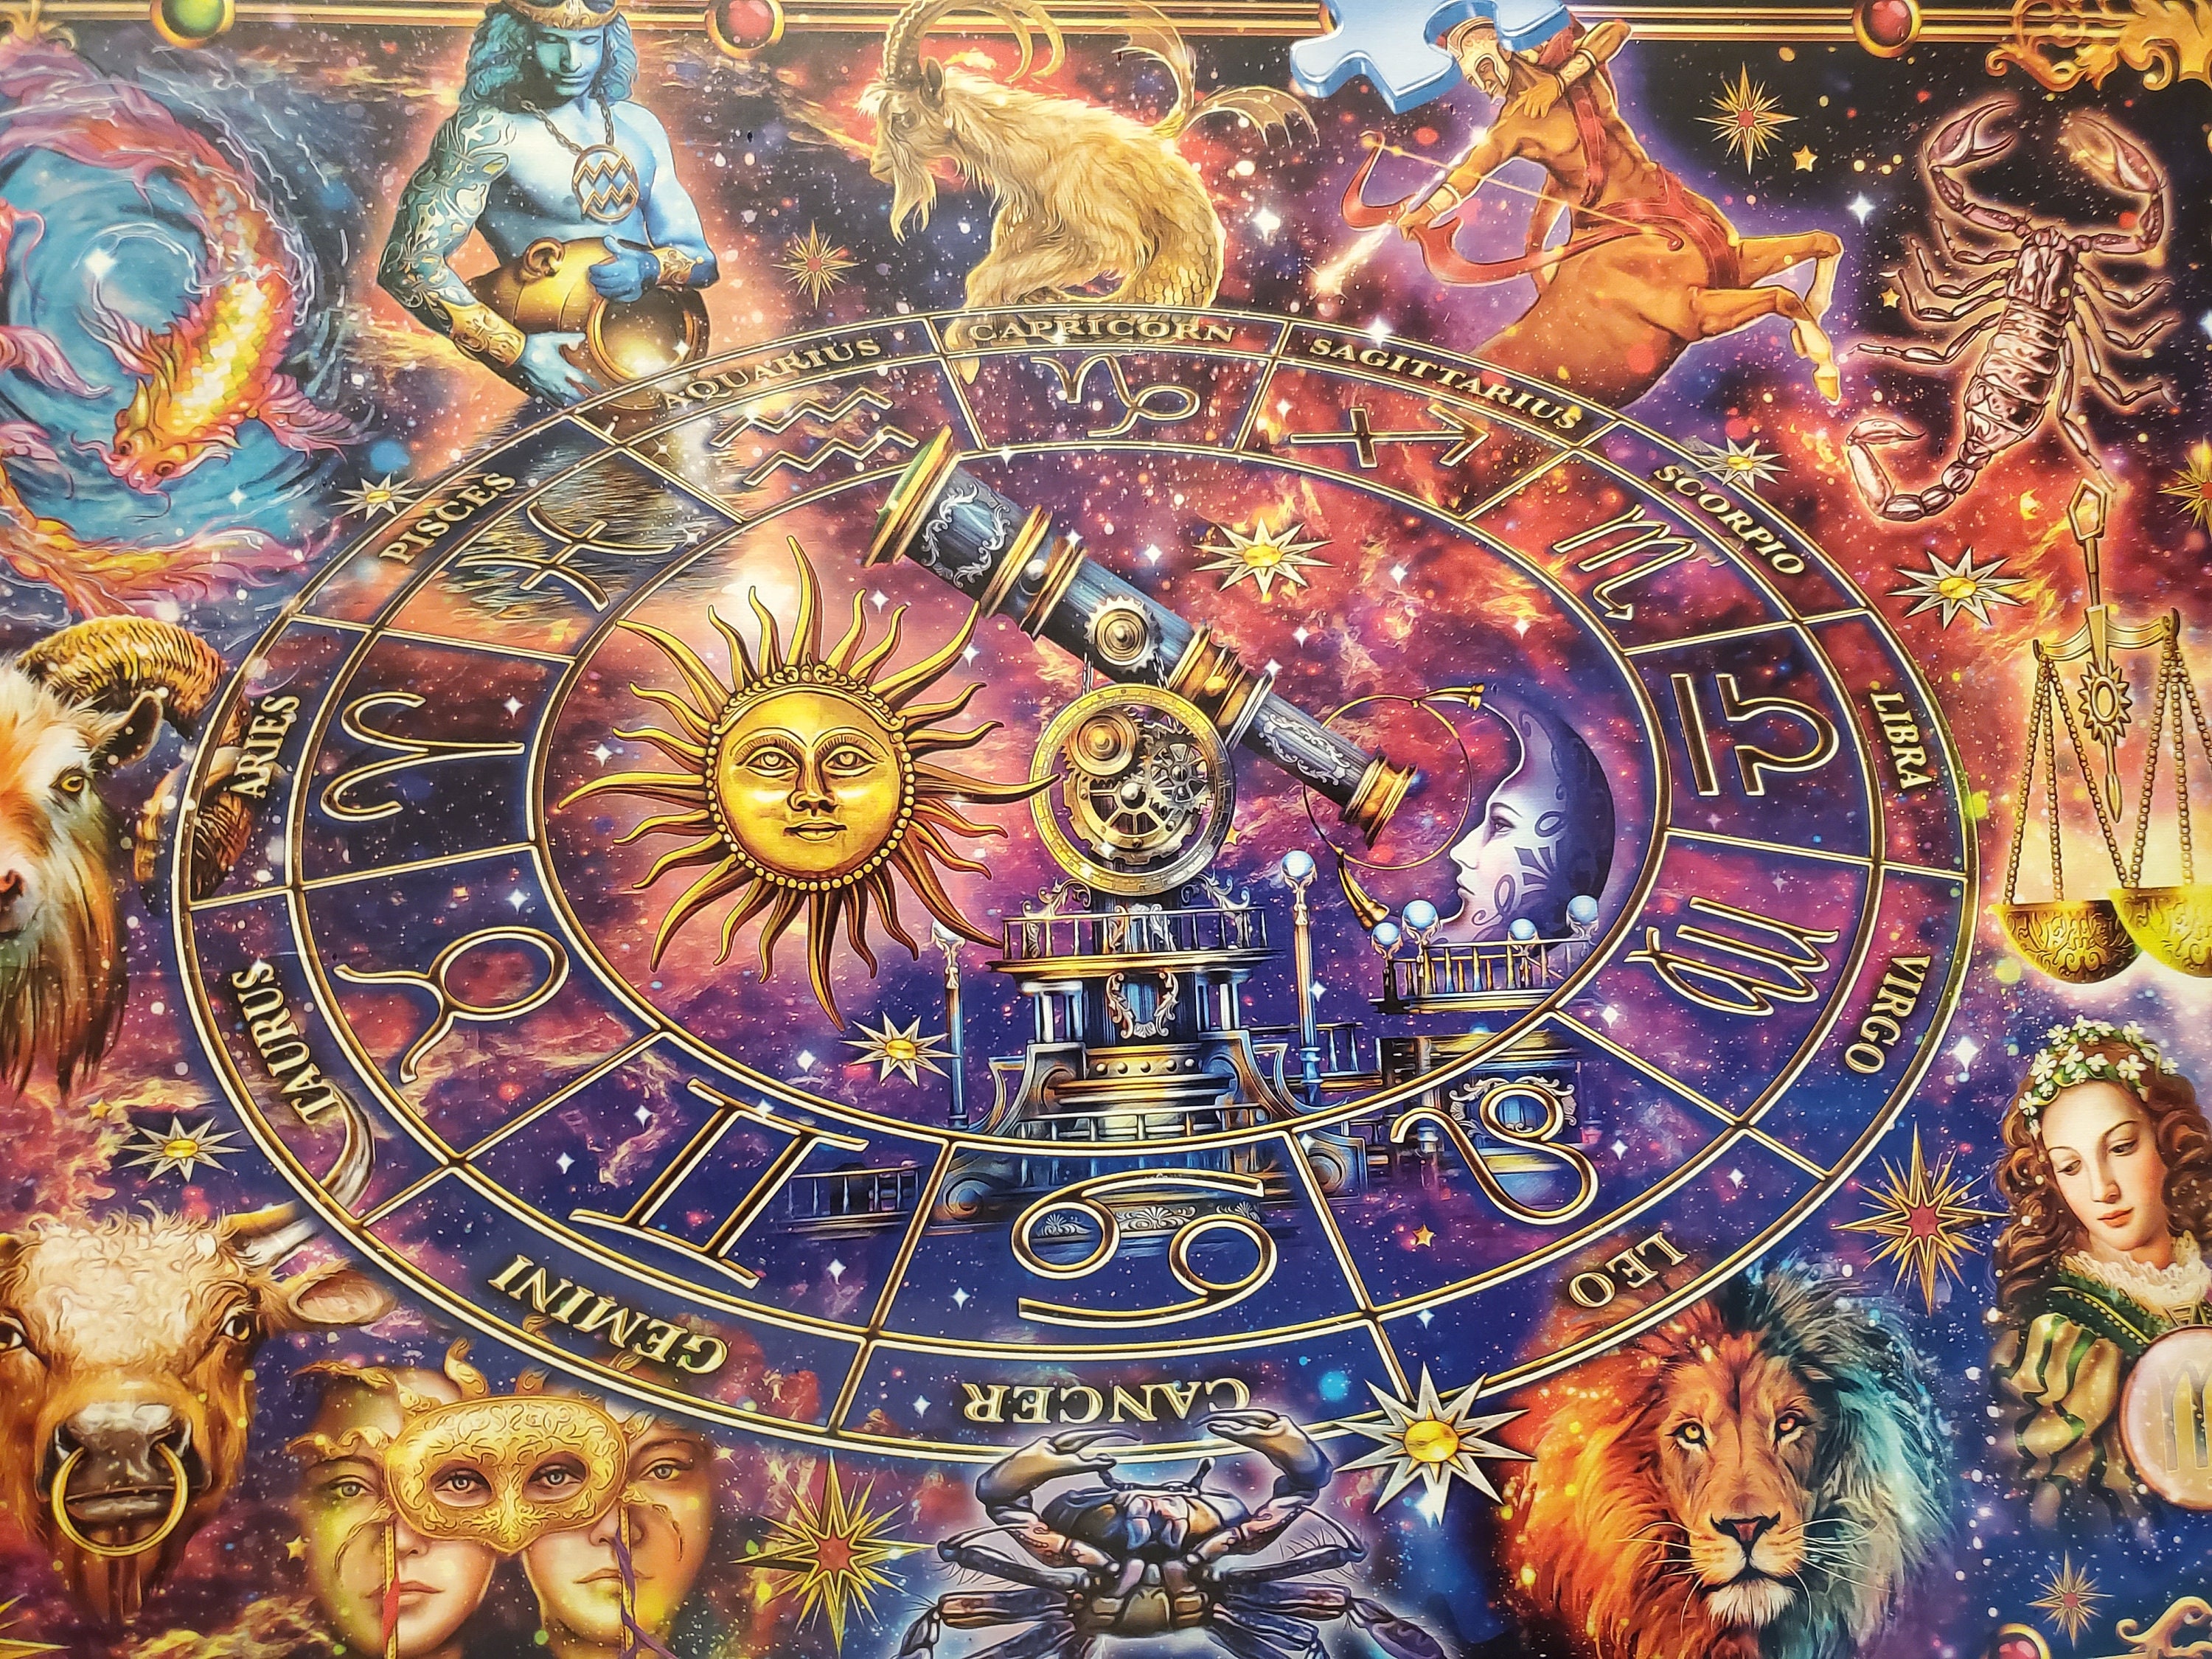 ZODIAC 3000 PIECE PUZZLE - THE TOY STORE